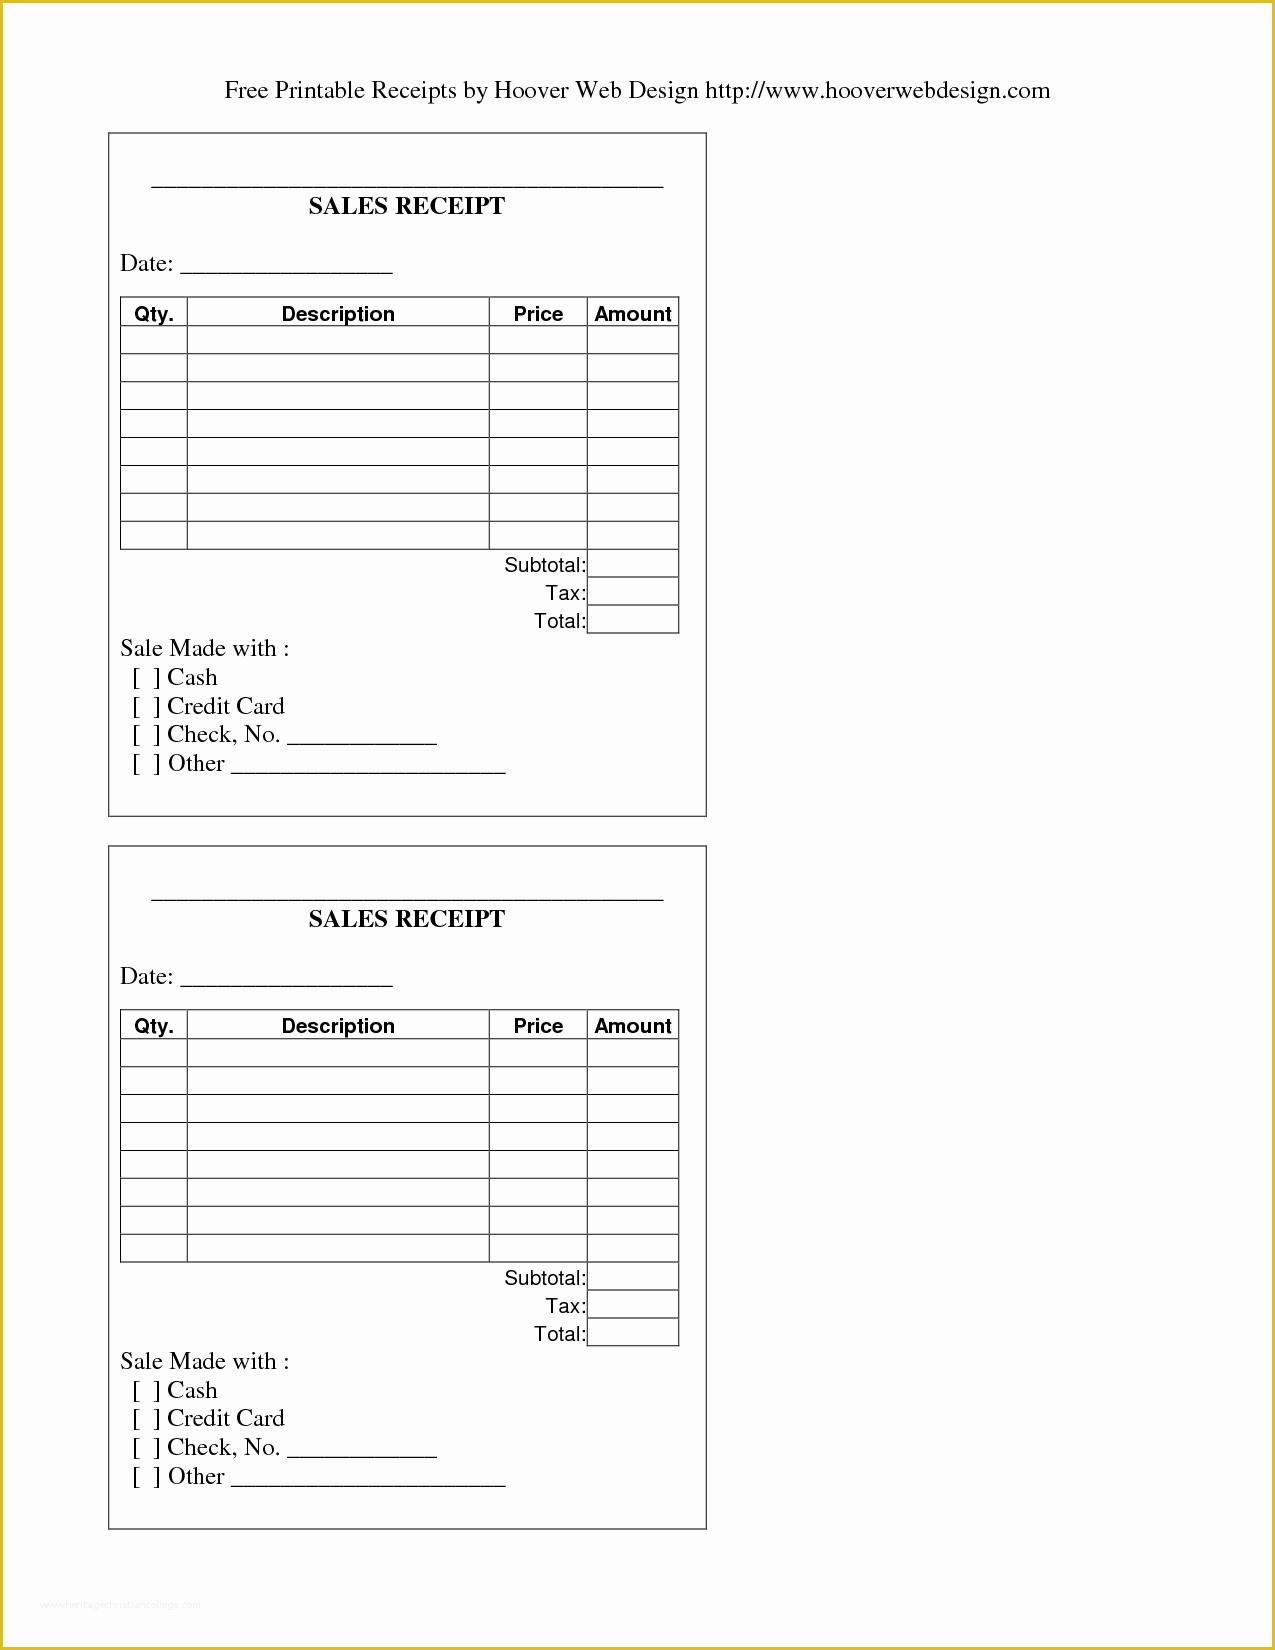 Free Printable Receipt Template Of Blank Receipt form Example Mughals